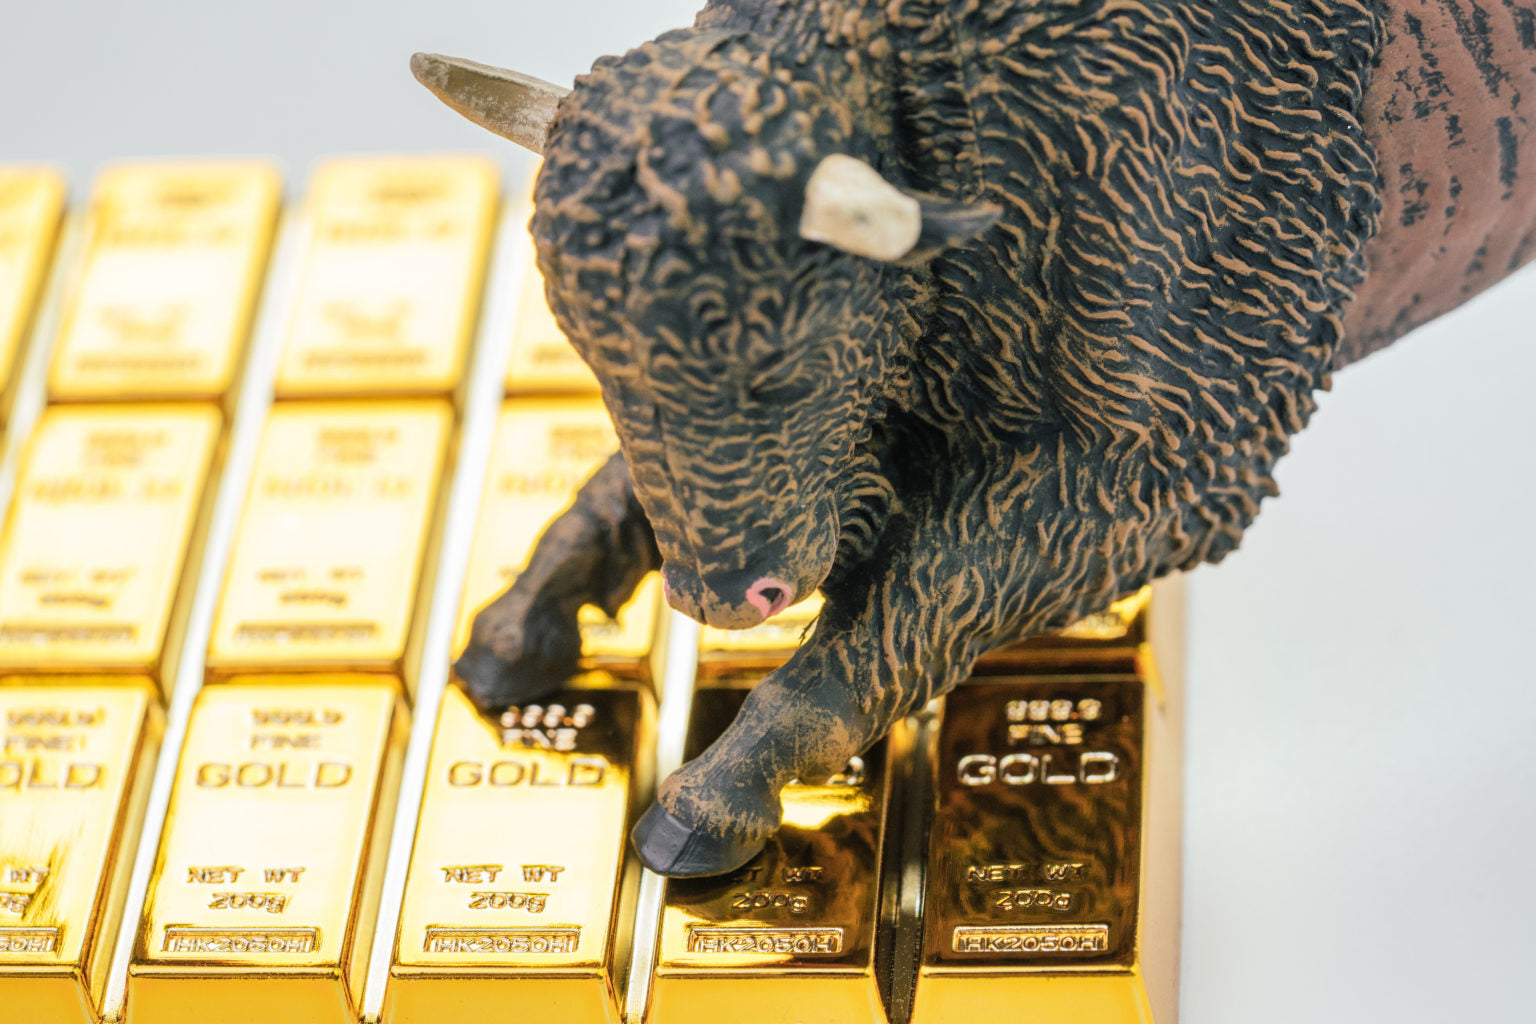 WORLD’S LARGEST HEDGE FUND SEES GOLD AT $2,000